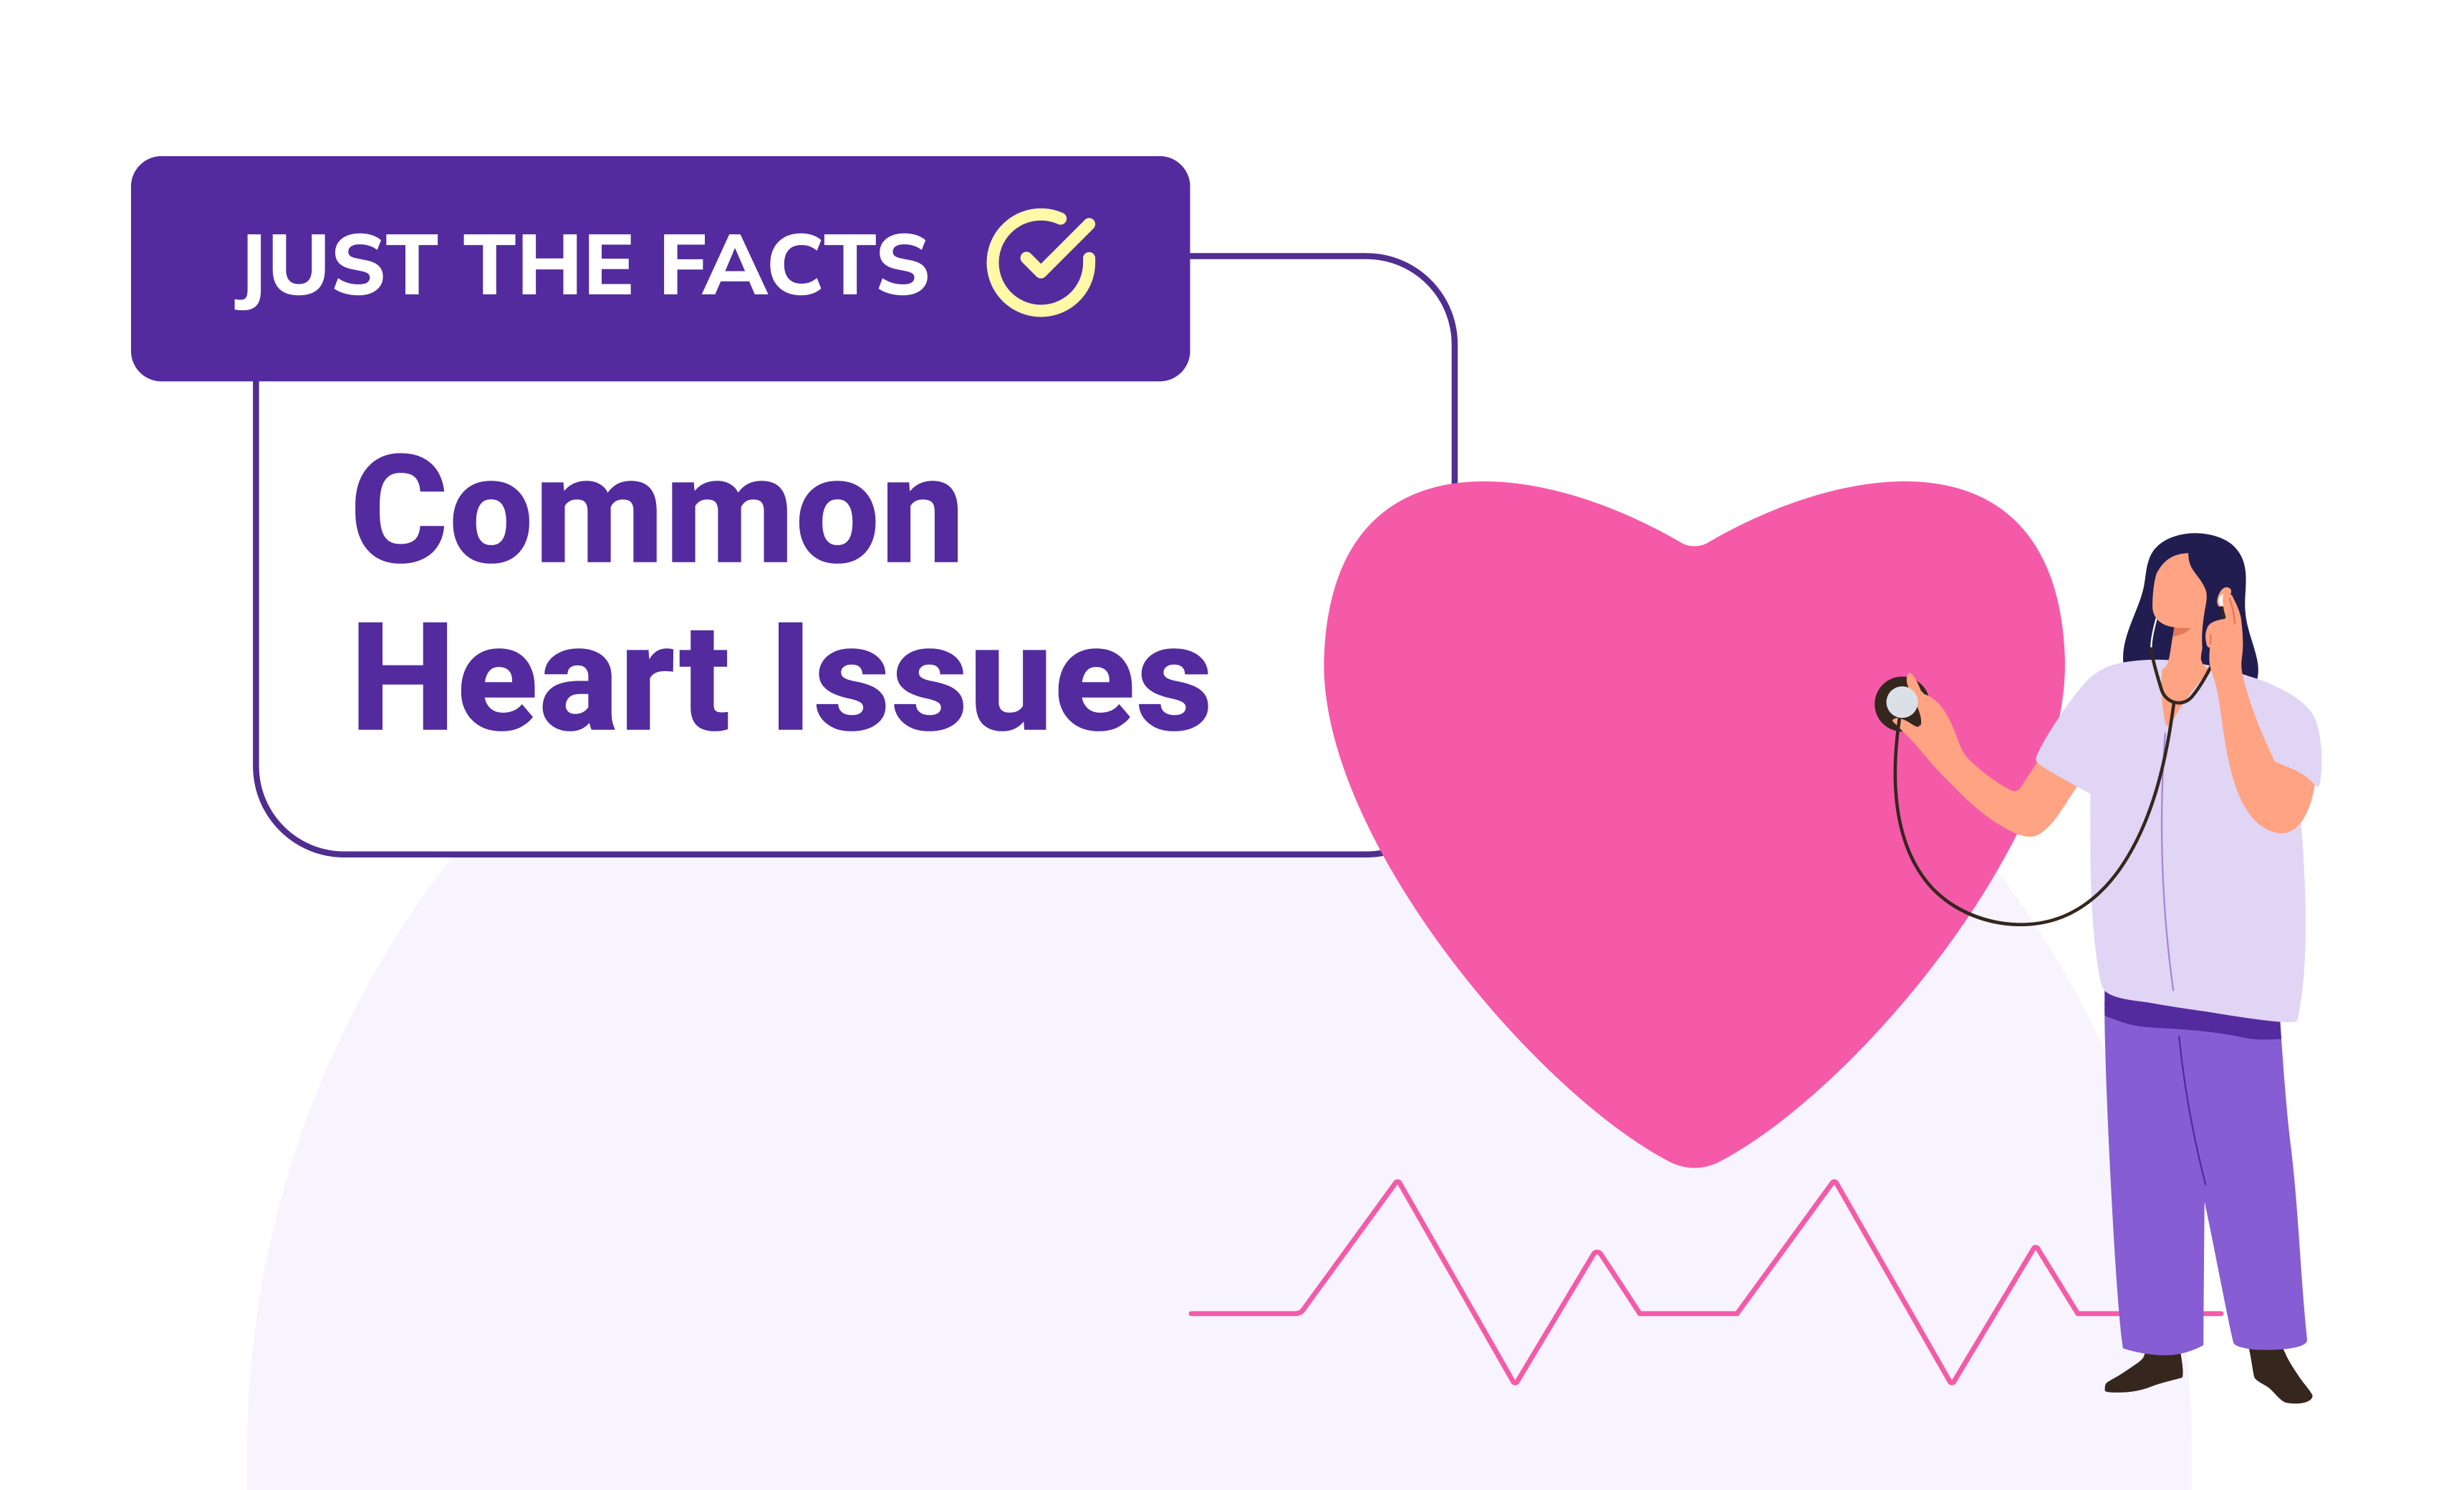 Just the Facts: Common Heart Issues